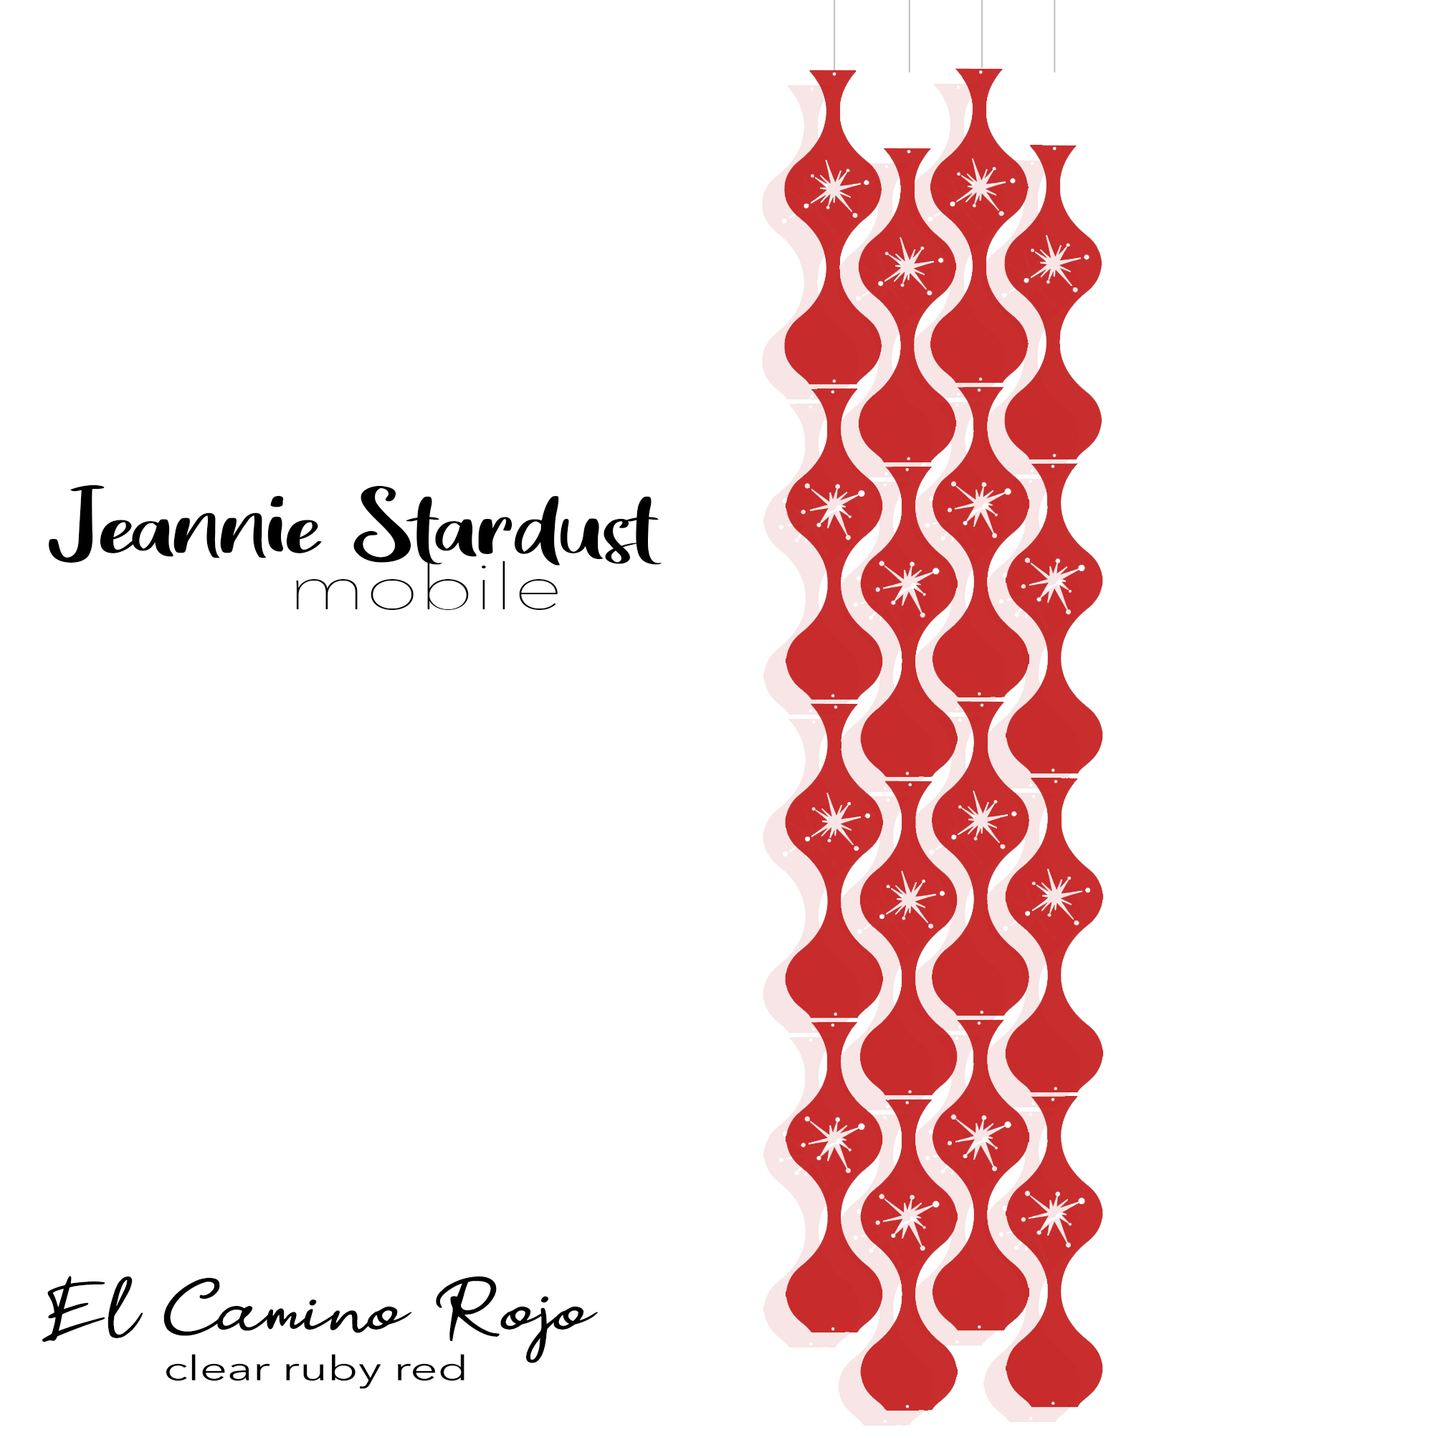  Jeannie Stardust El Camino Rojo Red - Clear red plexiglass acrylic hanging art mobiles in mid century modern style for home decor by AtomicMobiles.com